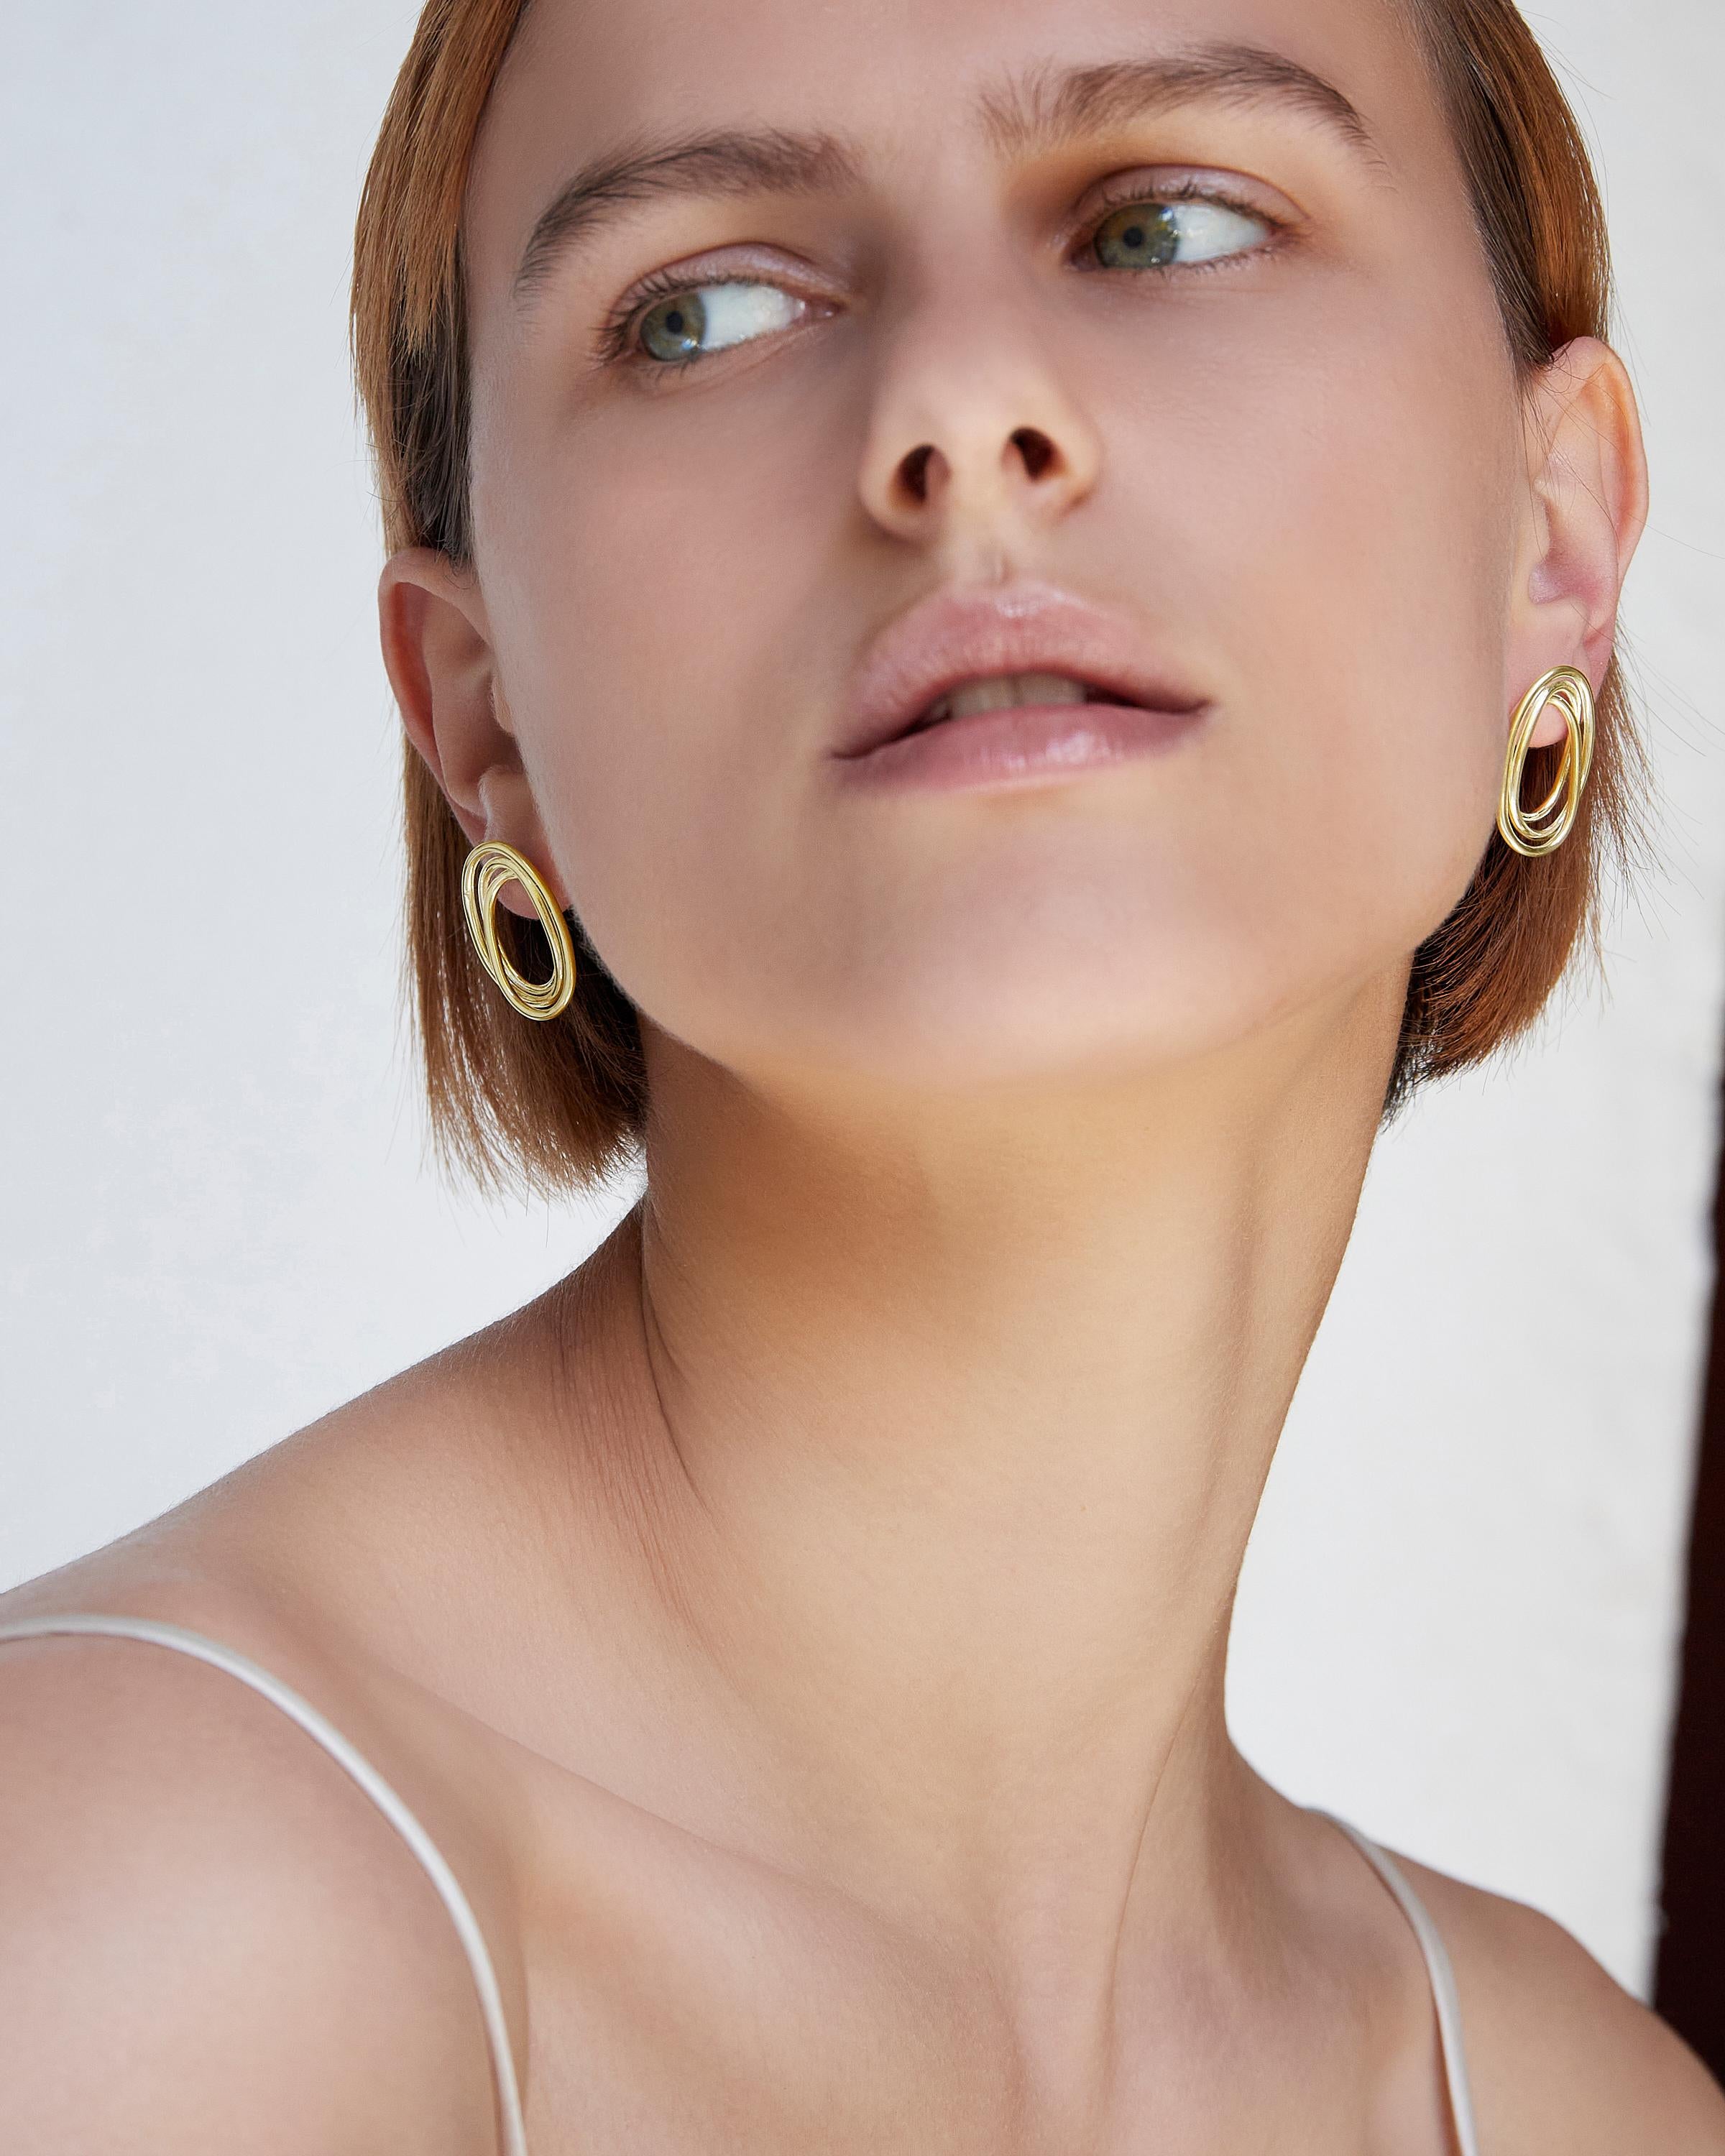 BAR Jewellery, London UK, SPIRO EARRINGS, Gold Plated 

Inspired by the work of artists Gustav Klimt and Sakiyama Takayuki, the Spiro earrings play on the concept of never-ending curves and flowing forms. These loosely tangled forms are a beautiful